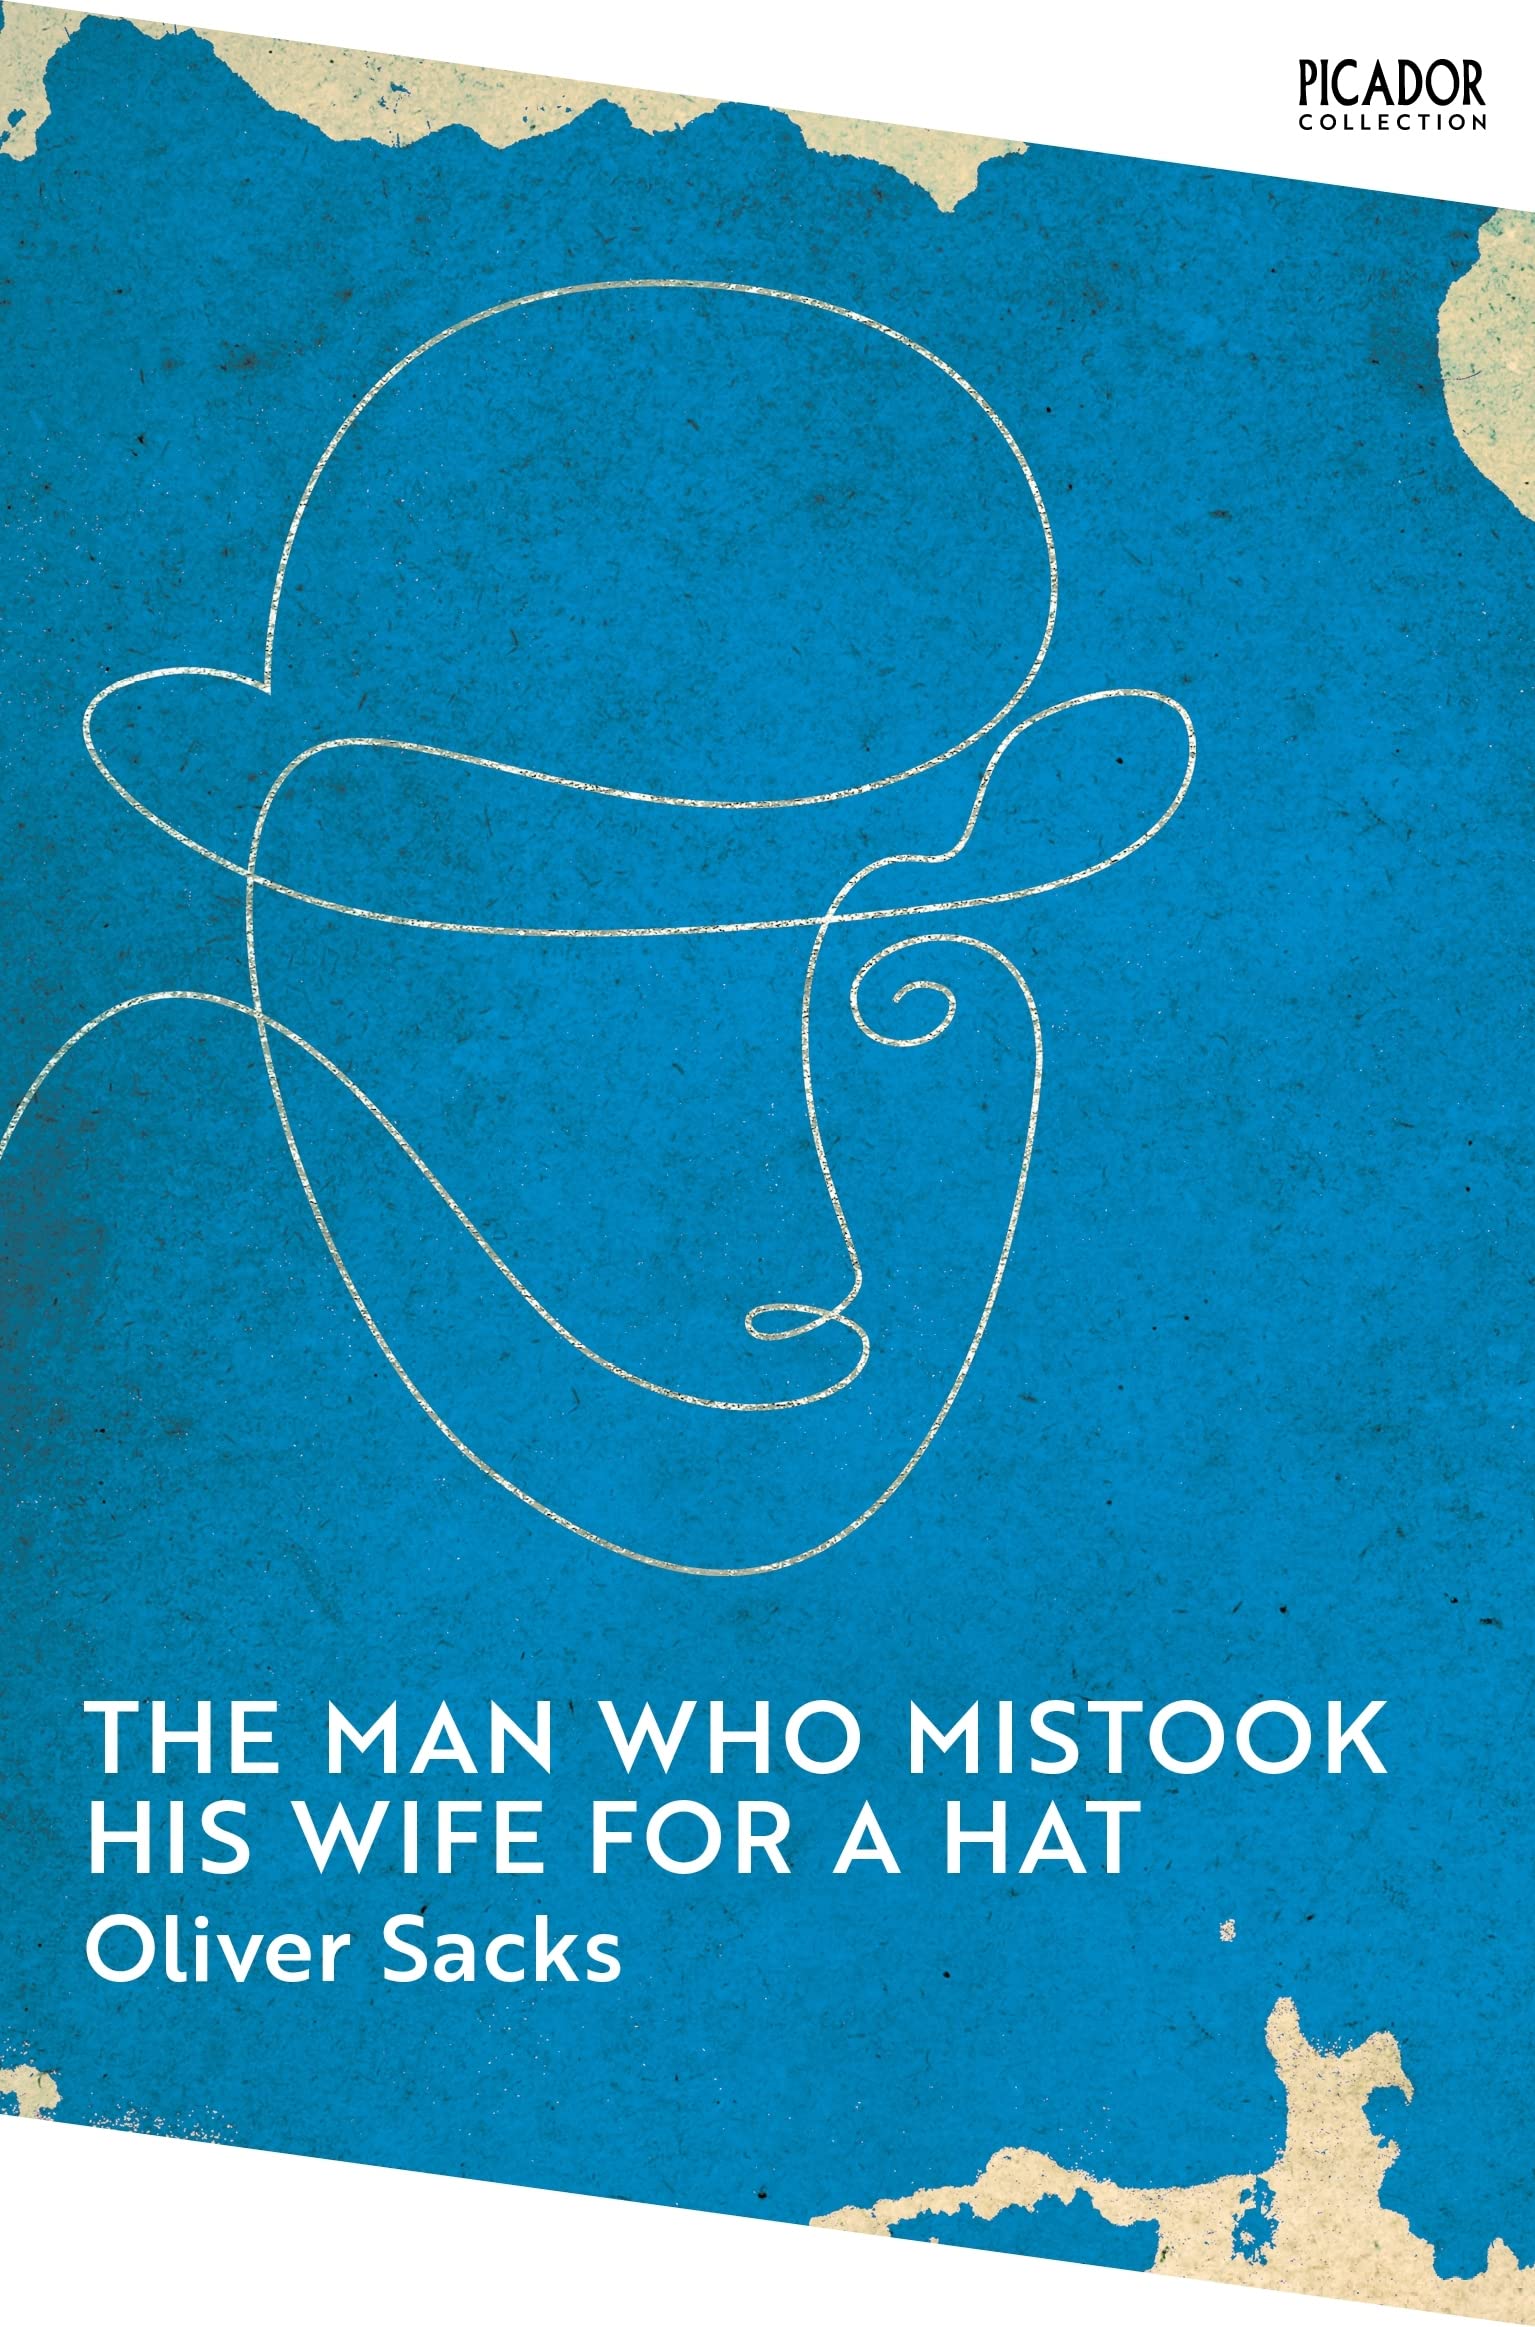 The Man Who Mistook His Wife for a Hat: and Other Clinical Tales